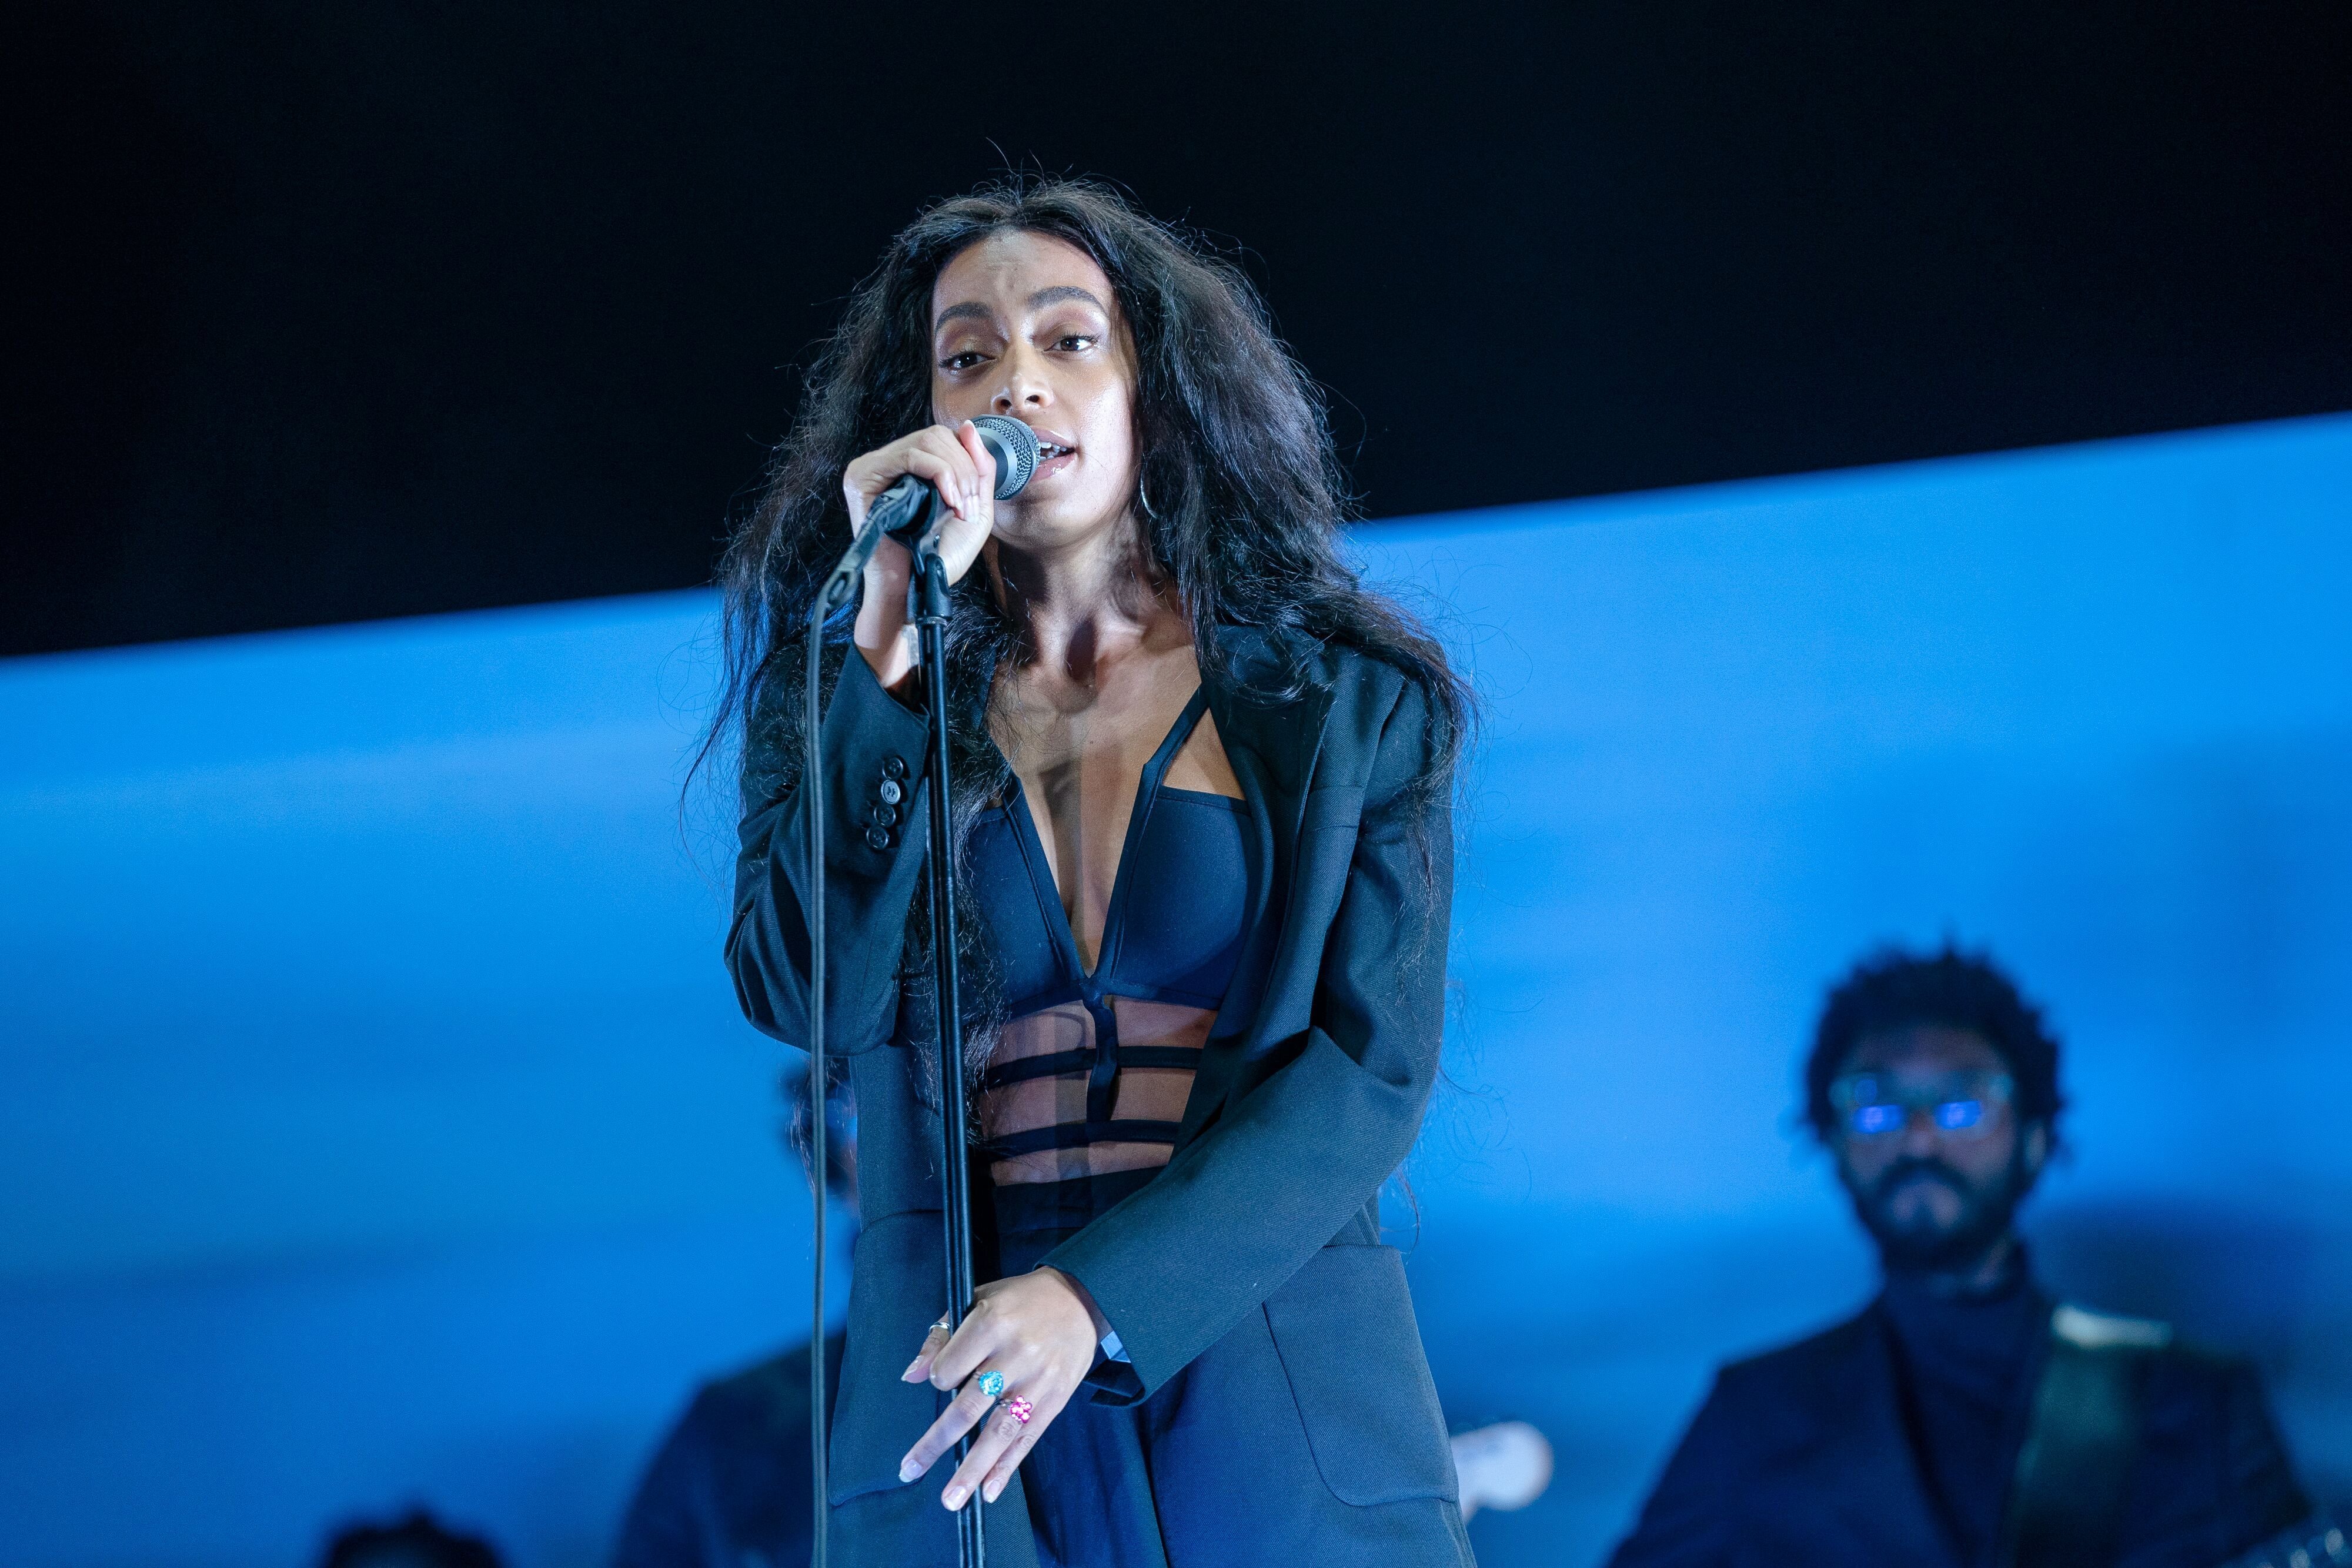 Solange at the Lovebox 2019 in Gunnersbury Park in London/ Source: Getty Images